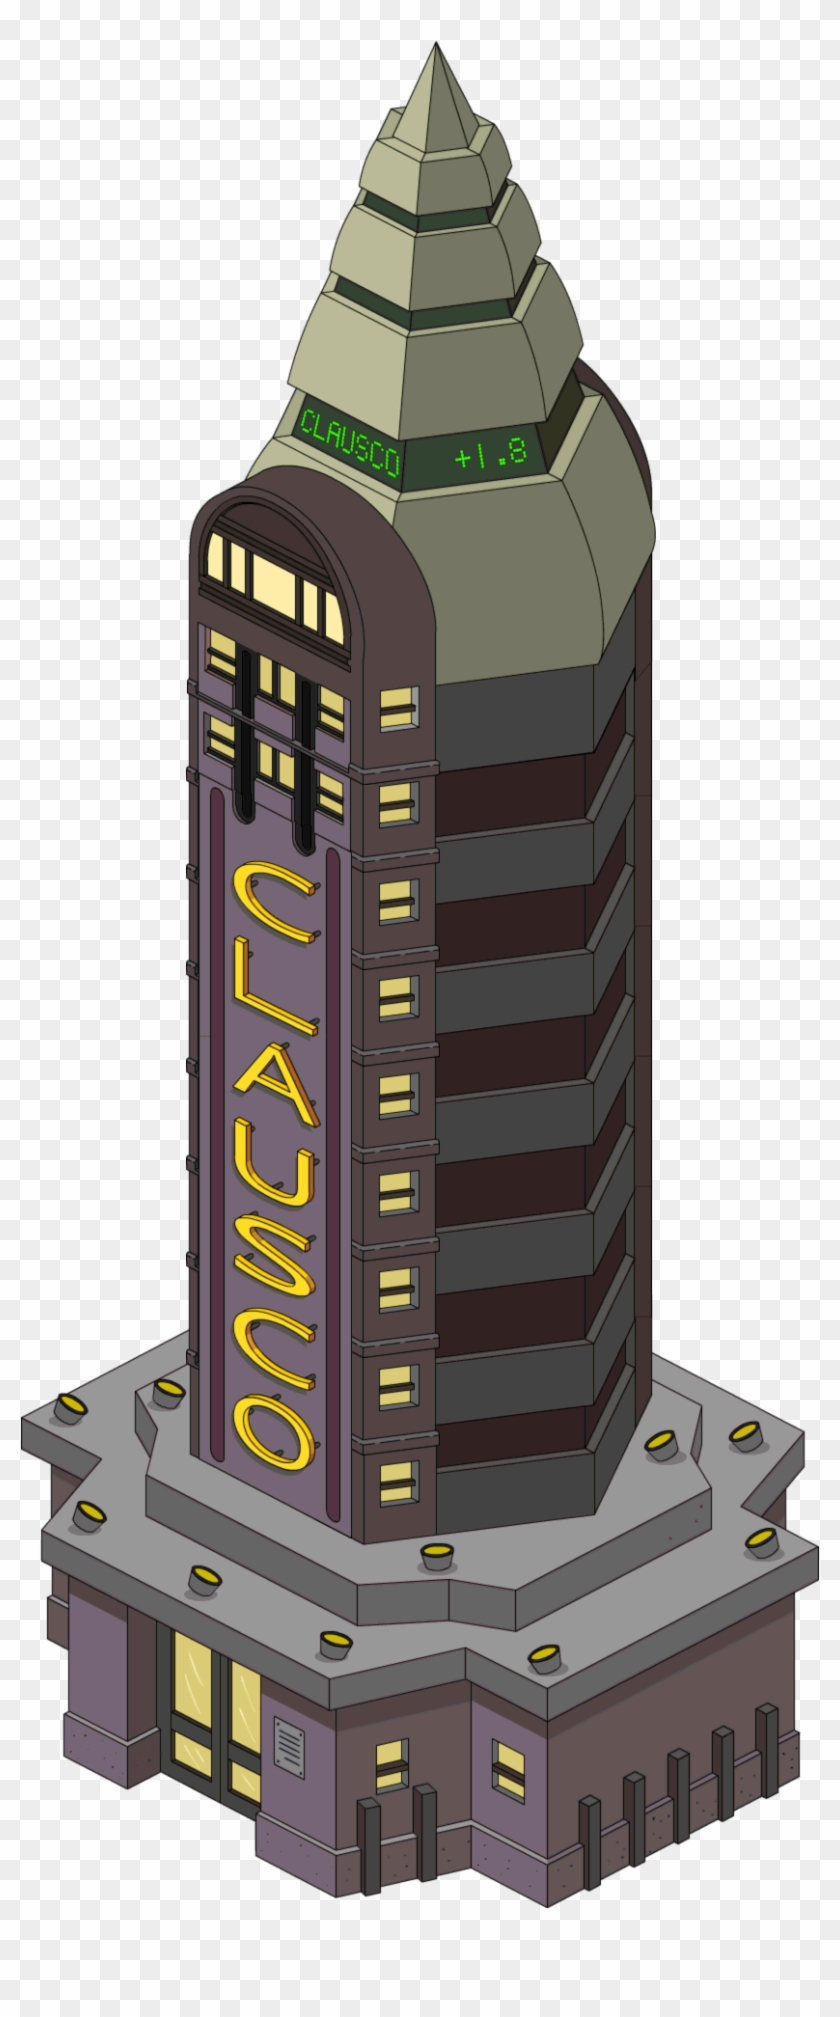 Tapped Out Clausco - Tower Block Clipart